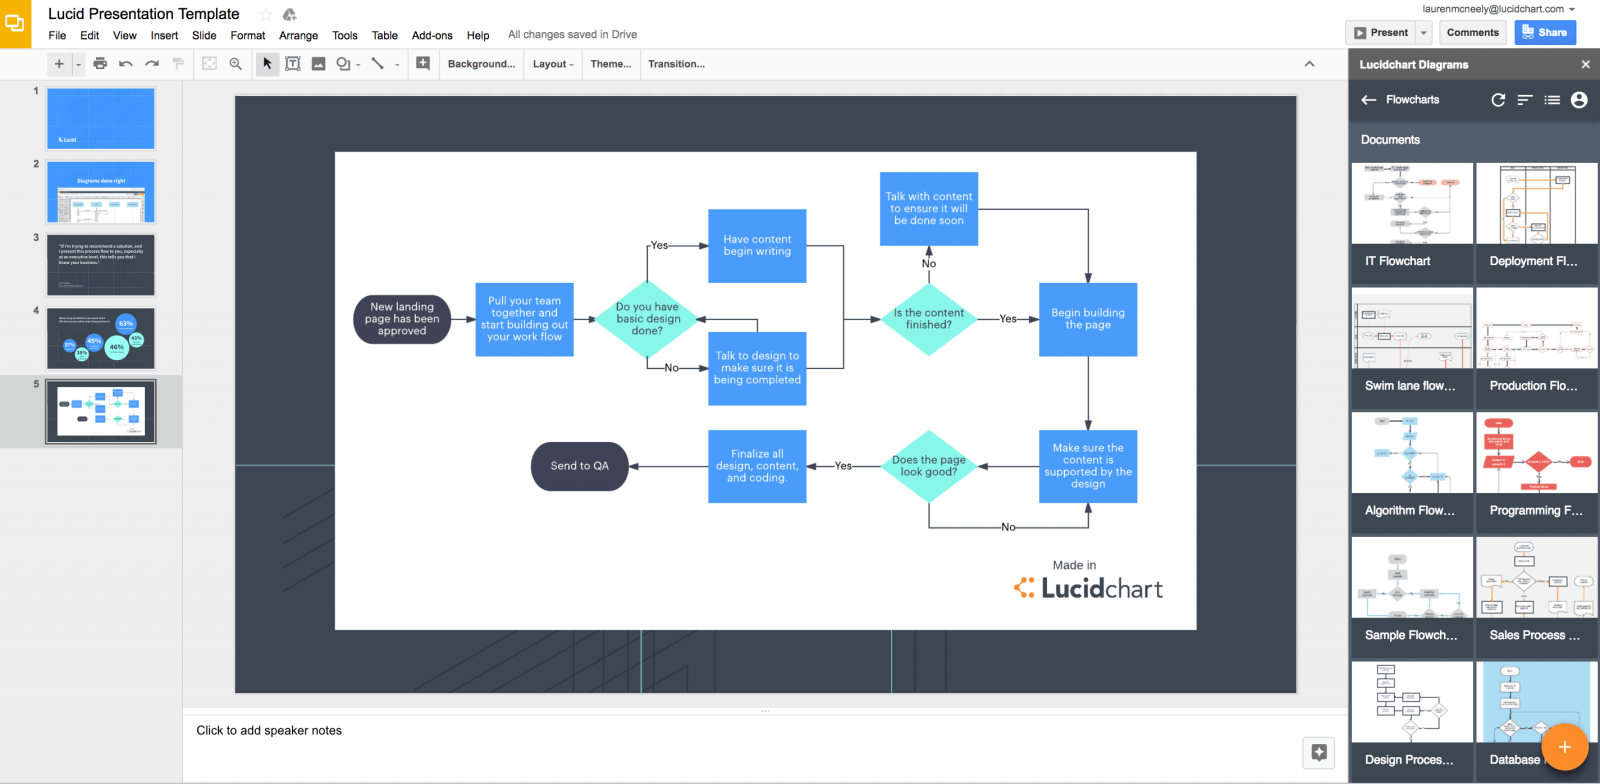 lucidchart-integrates-different-3rd-party-apps-for-refined-user-experience